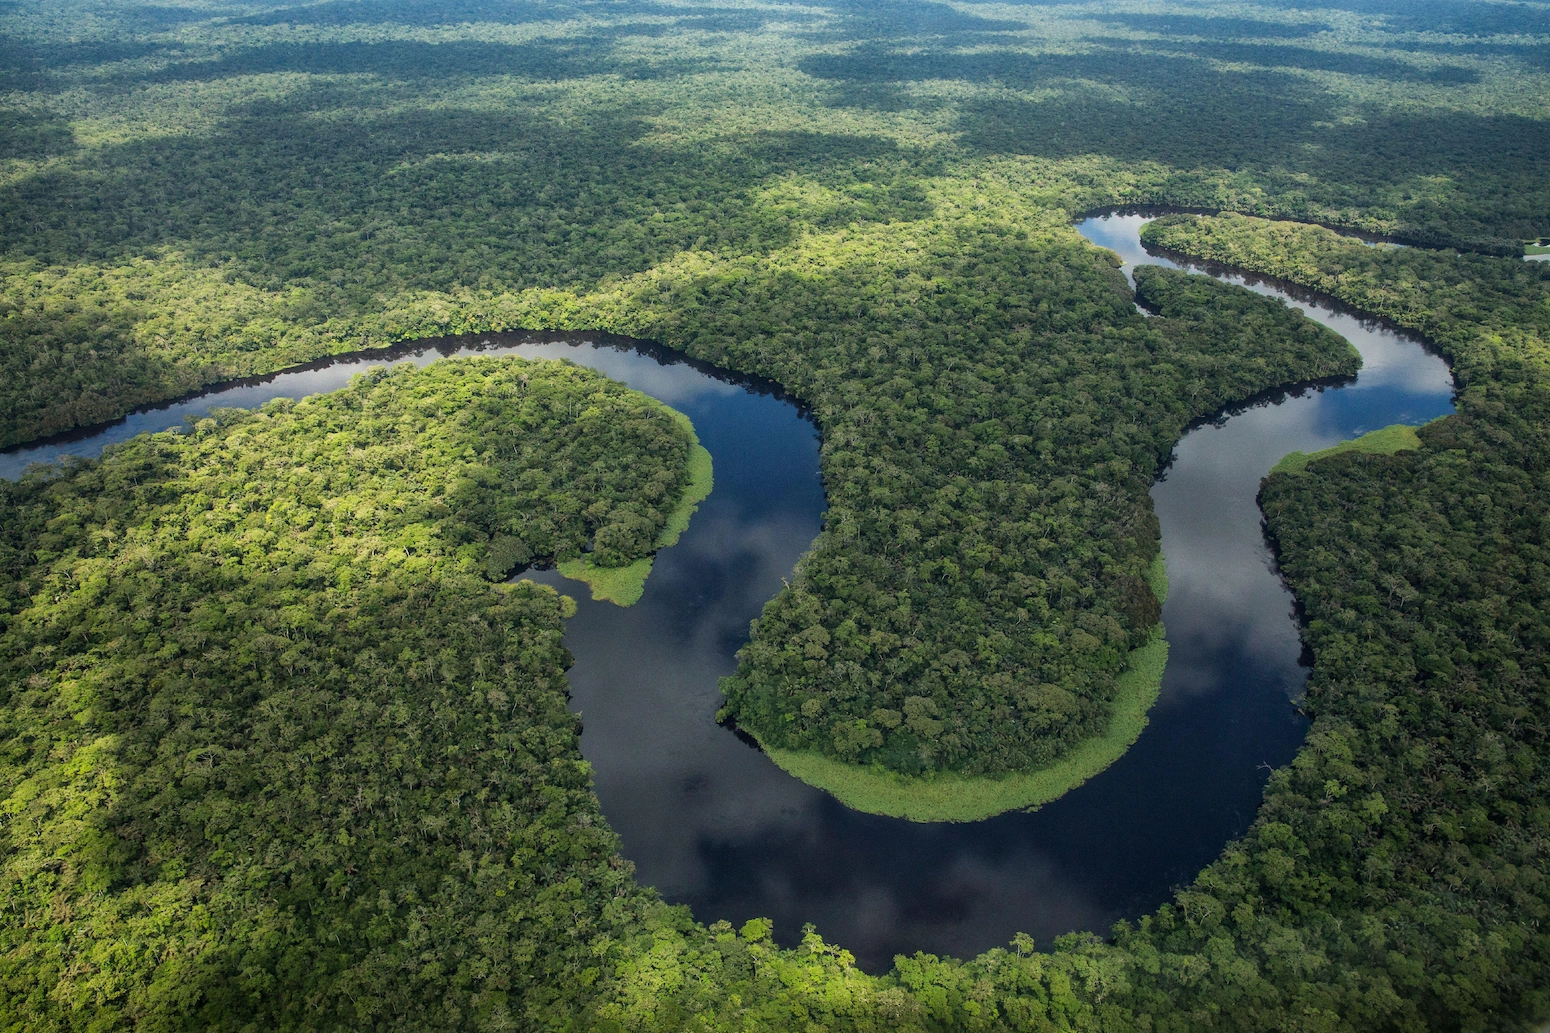 Tropical rainforest and meandering river in Salonga National Park, Democratic Republic of Congo